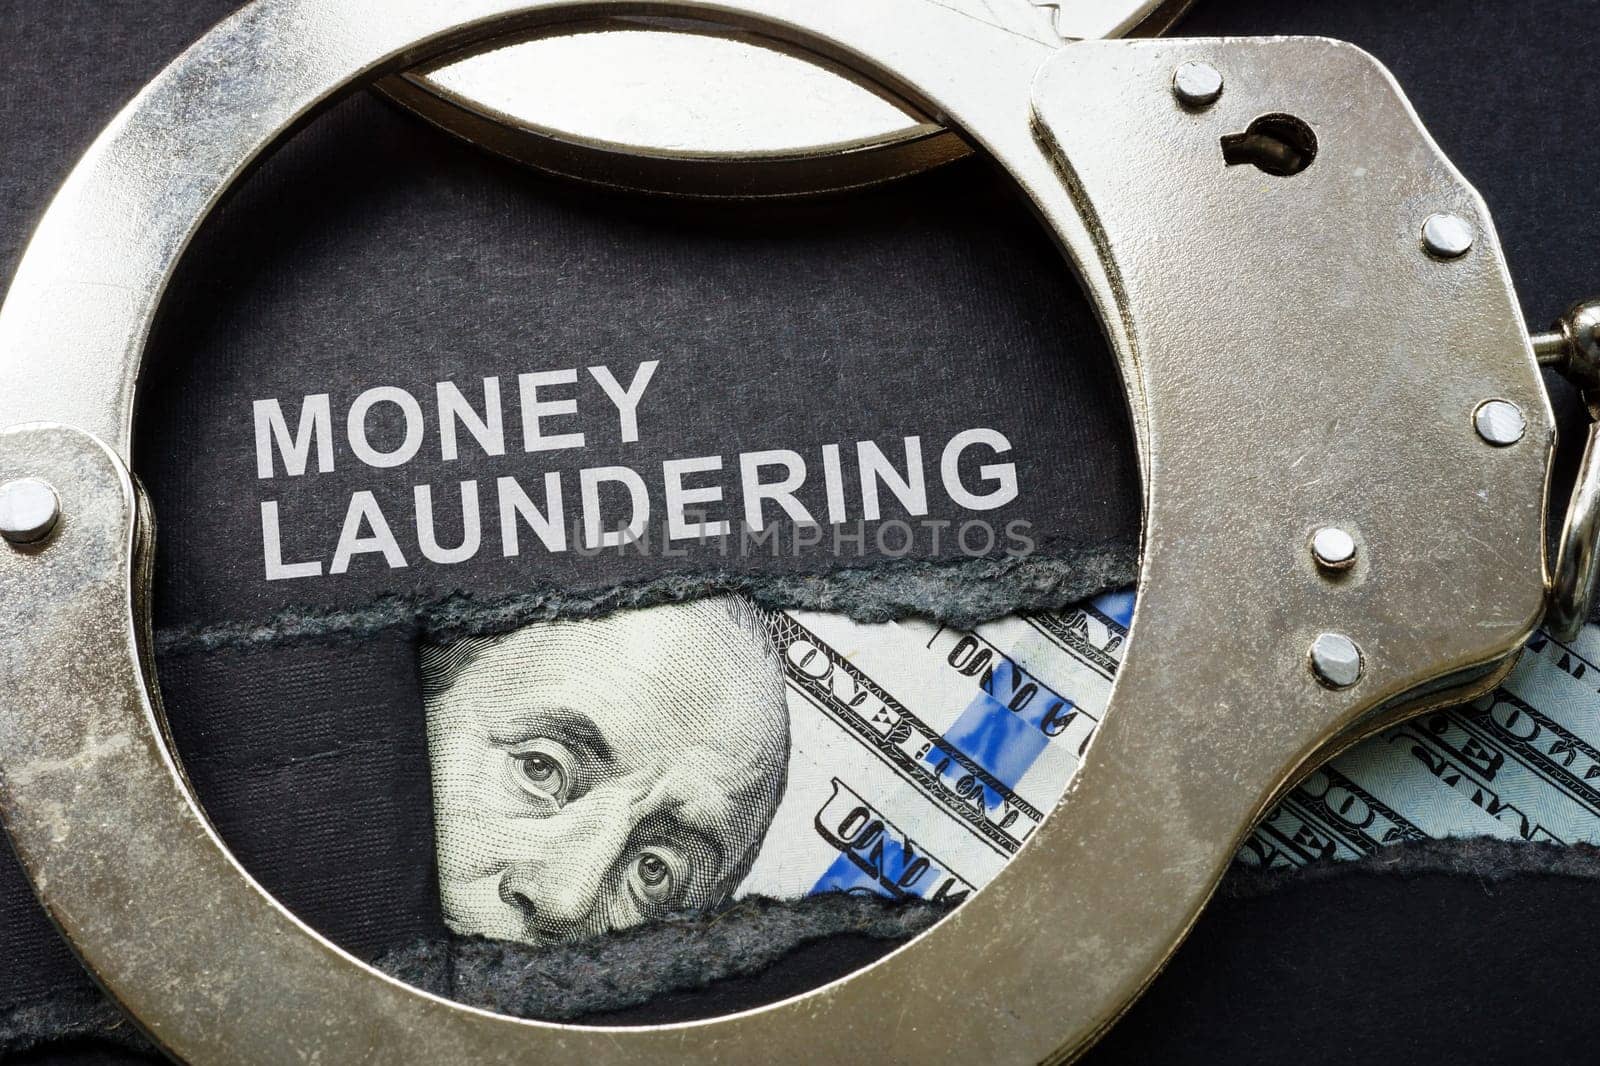 Torn paper, handcuffs and money. Money laundering concept. by designer491